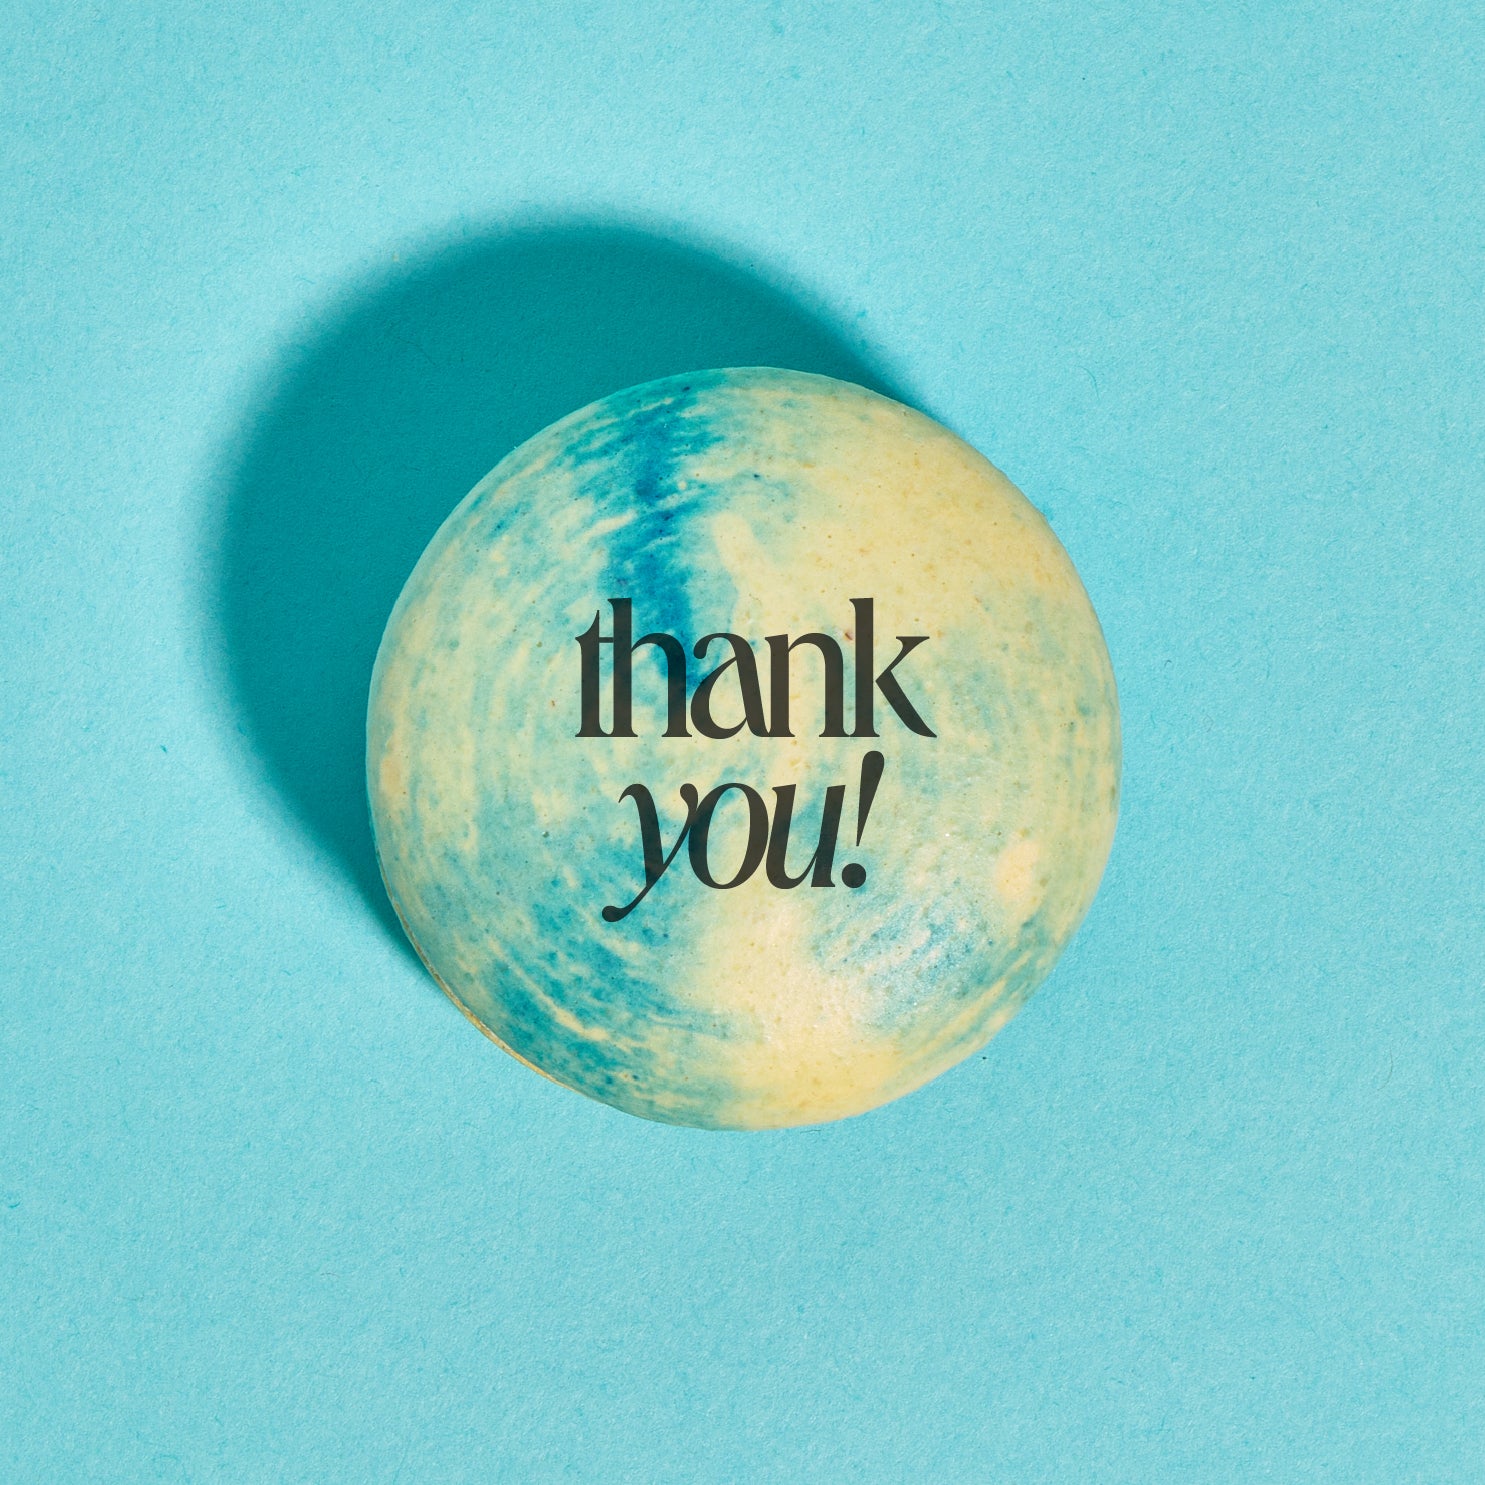 Overhead shot of a yellow and blue tie-dye macaron with the words "thank you!" printed in black ink on top. The macaron is placed on a bright aqua backdrop.